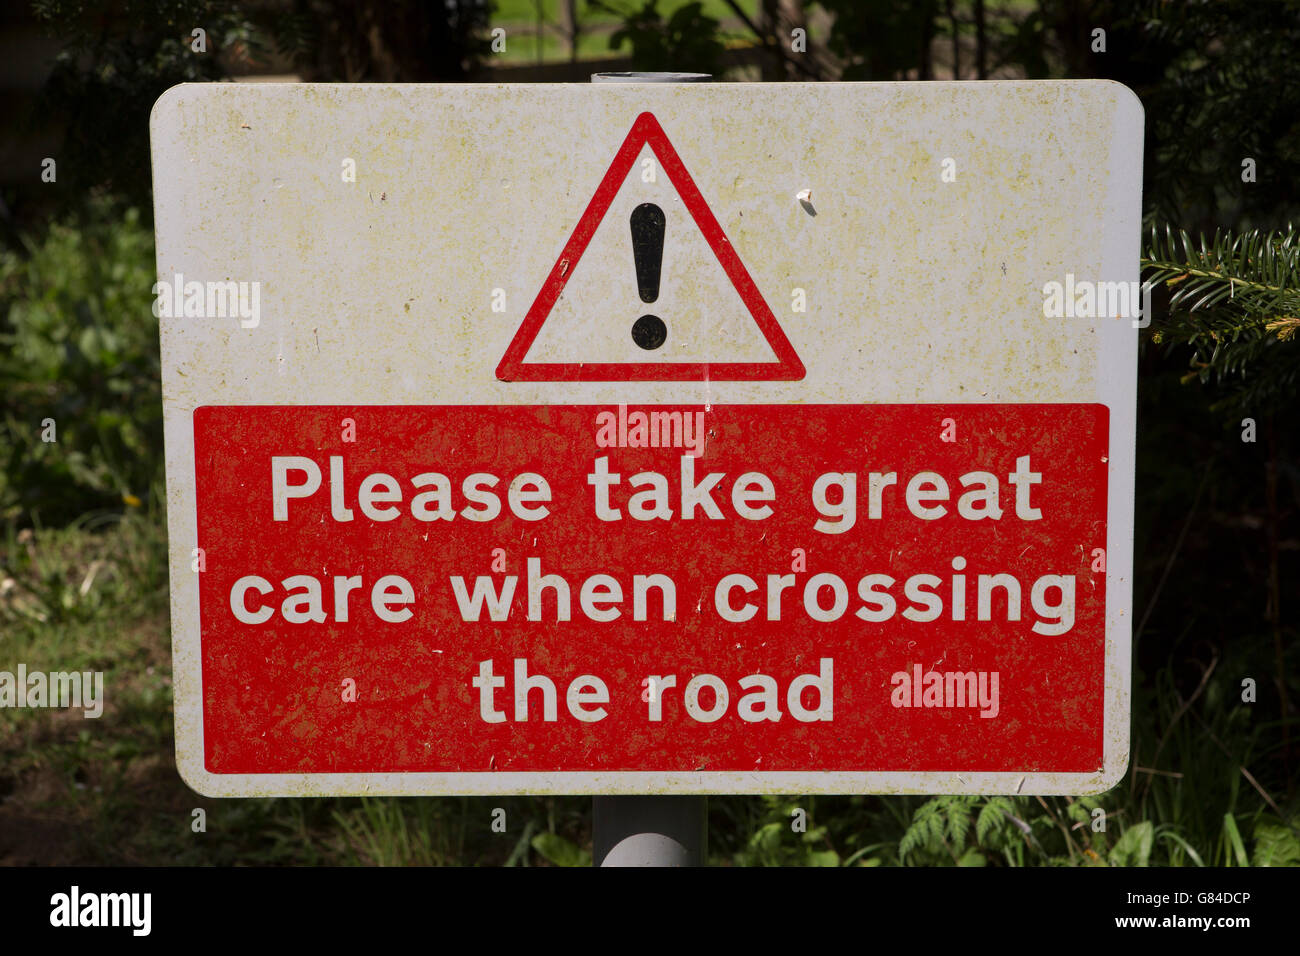 A sign for Matfen Hall Golf Course at Matfen, England. The sign urse people to take great care when crossing the road. Stock Photo